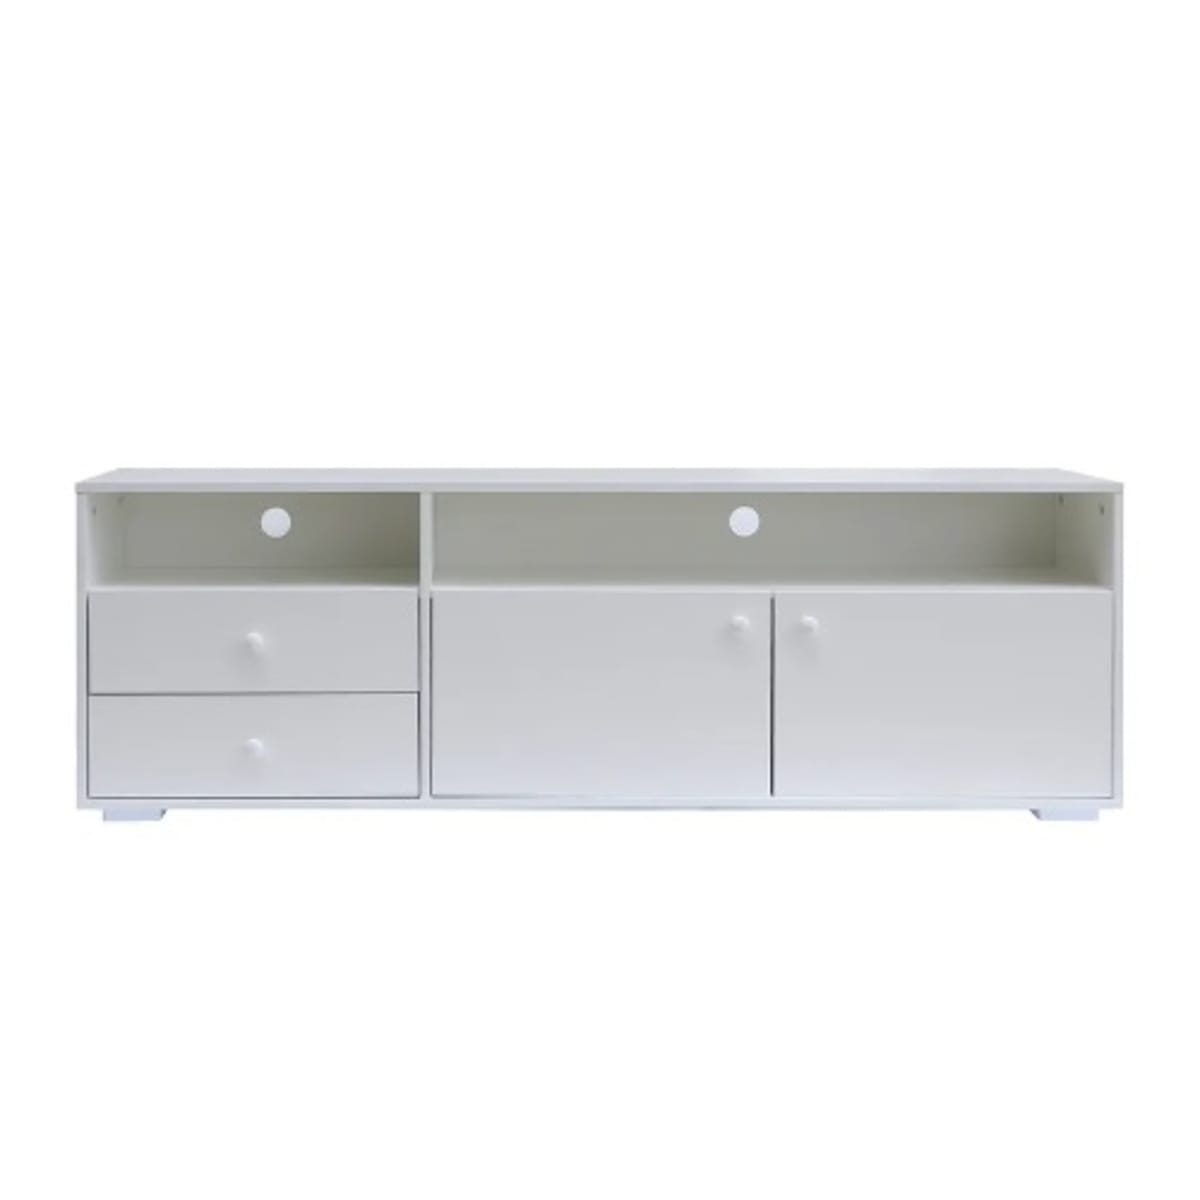 Tiwa Tv Stand With Drawer Up To 60inches